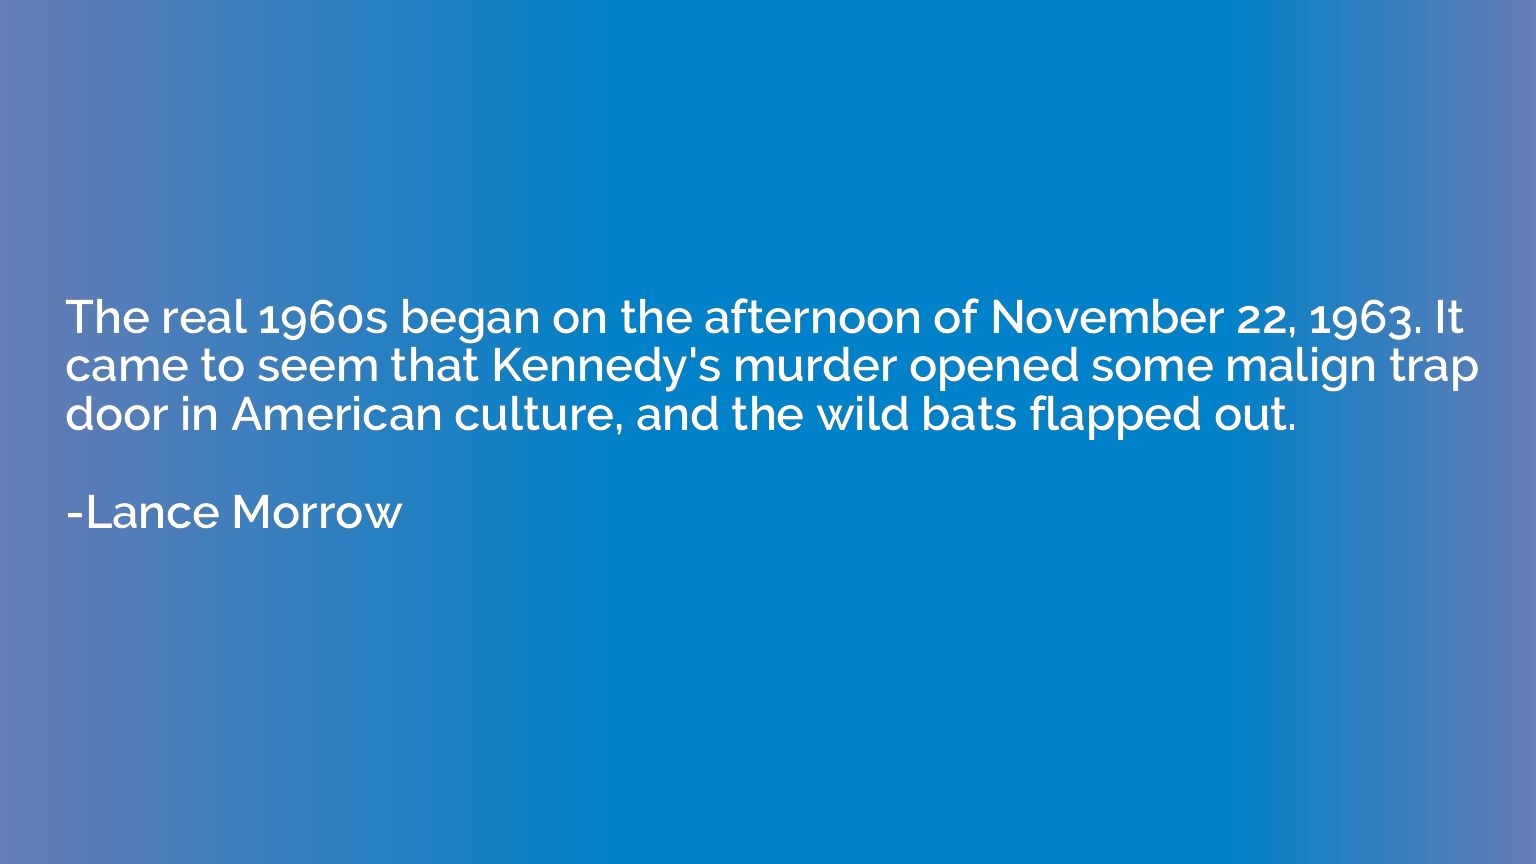 The real 1960s began on the afternoon of November 22, 1963. 